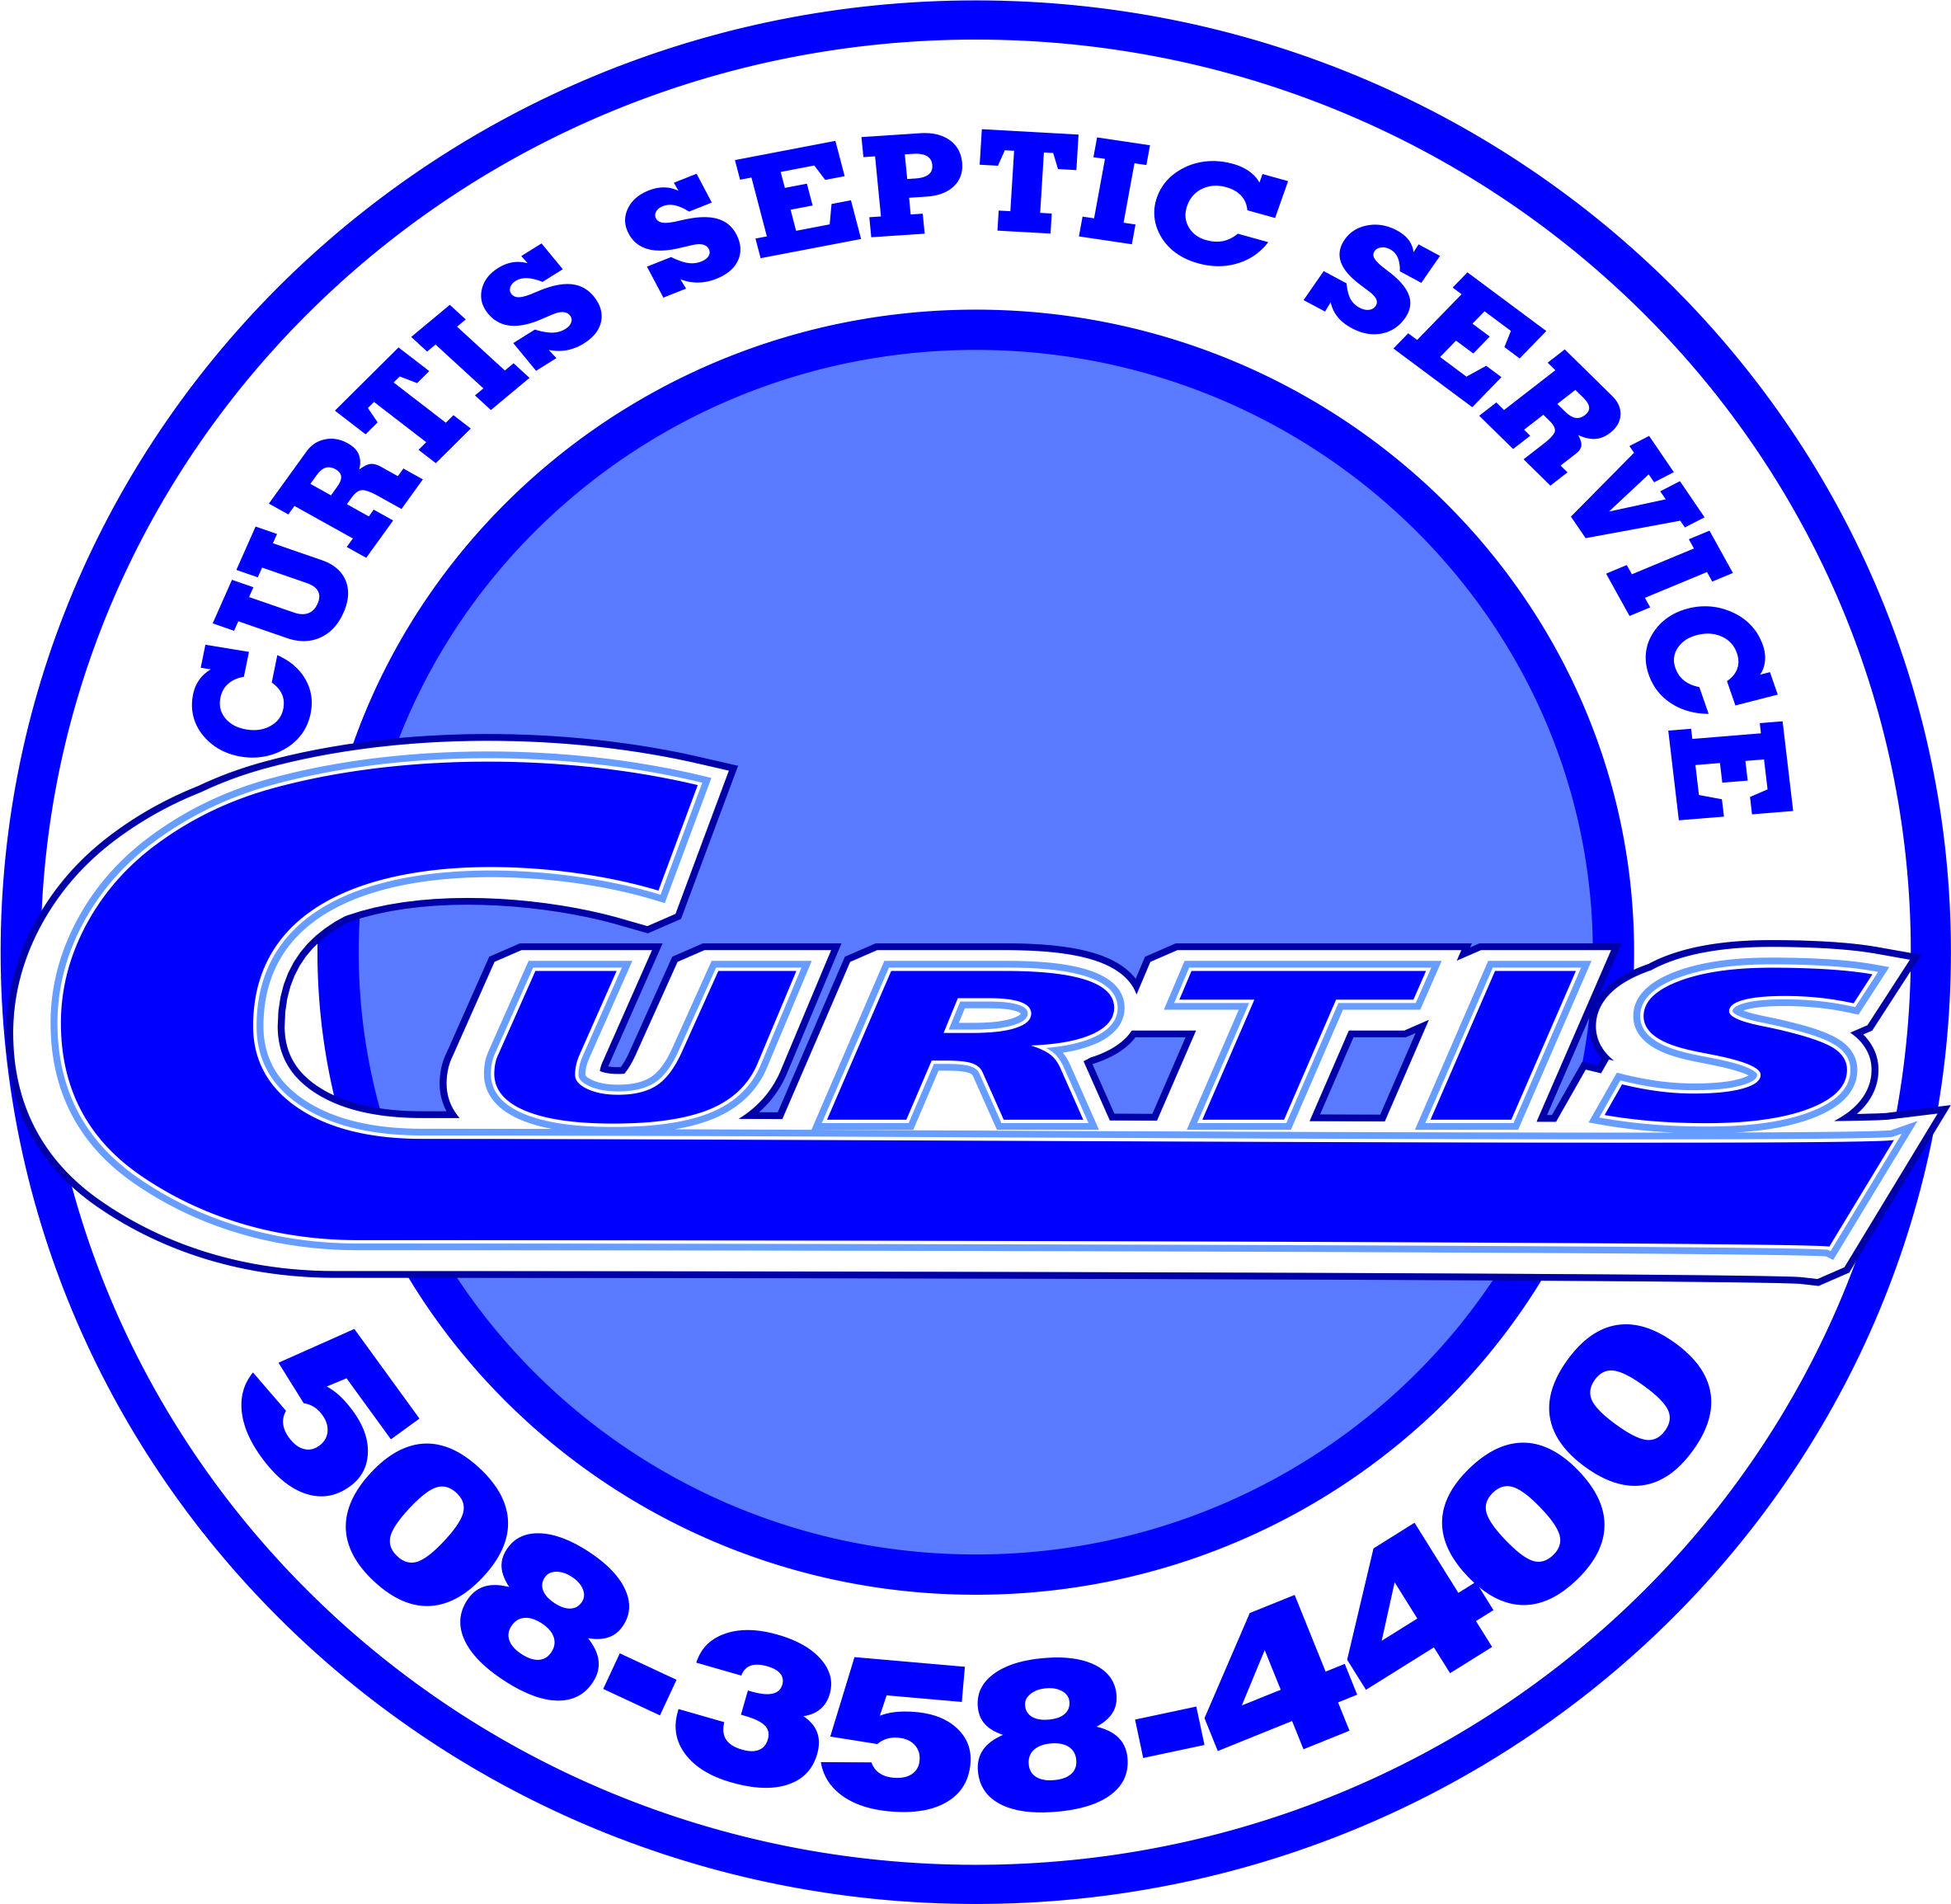 Residential and commercial septic system installation in Wellesley, MA